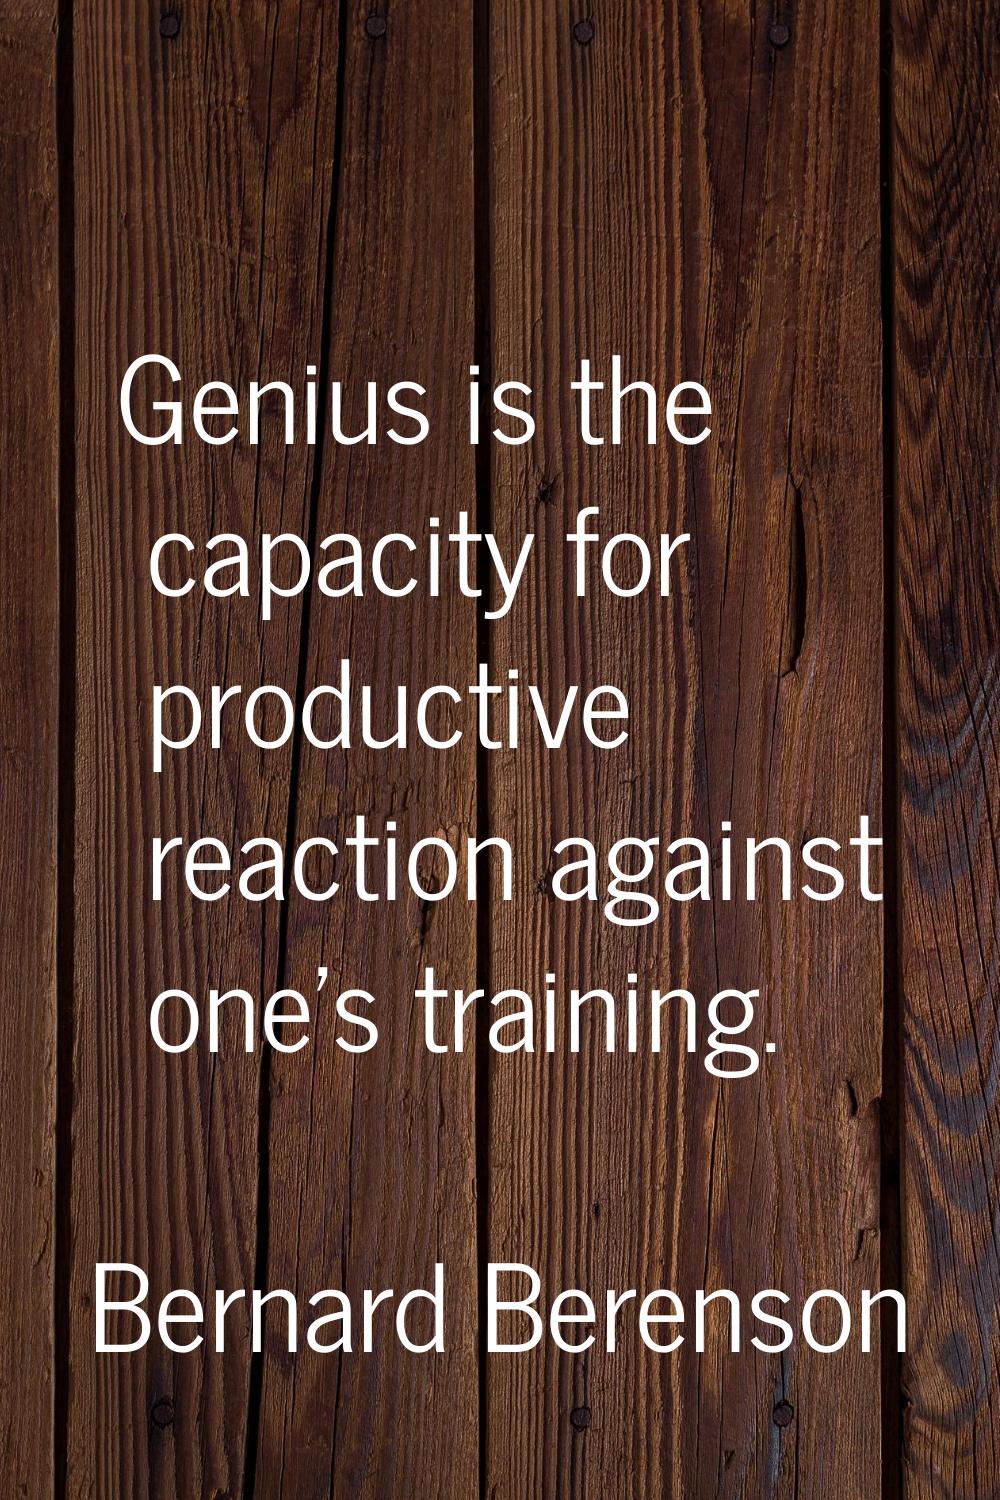 Genius is the capacity for productive reaction against one's training.